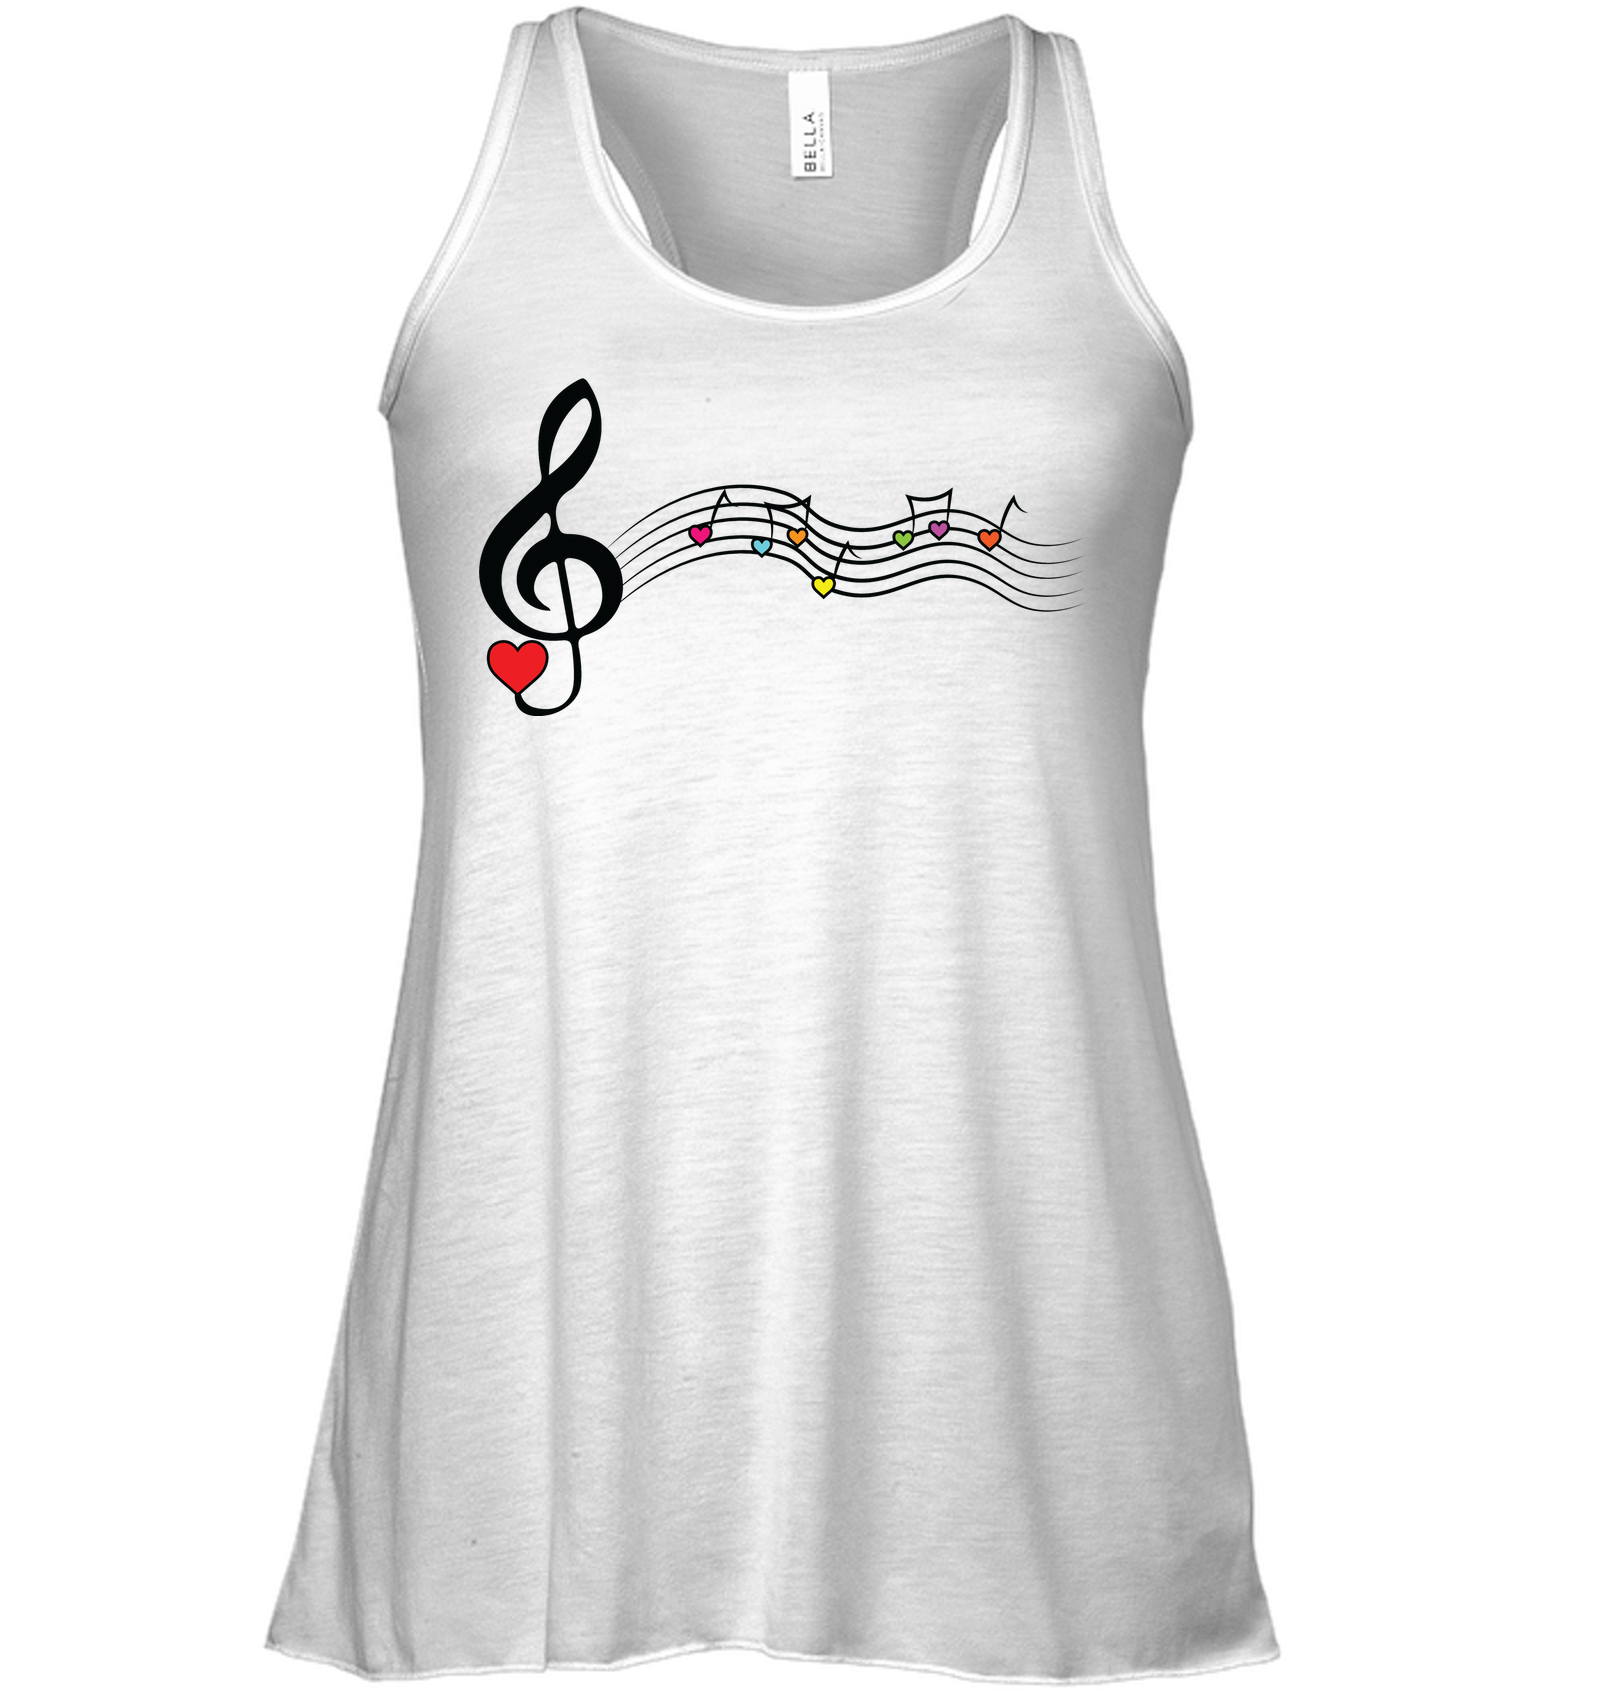 Musical Waves, Heart Notes and Colors - Bella + Canvas Women's Flowy Racerback Tank